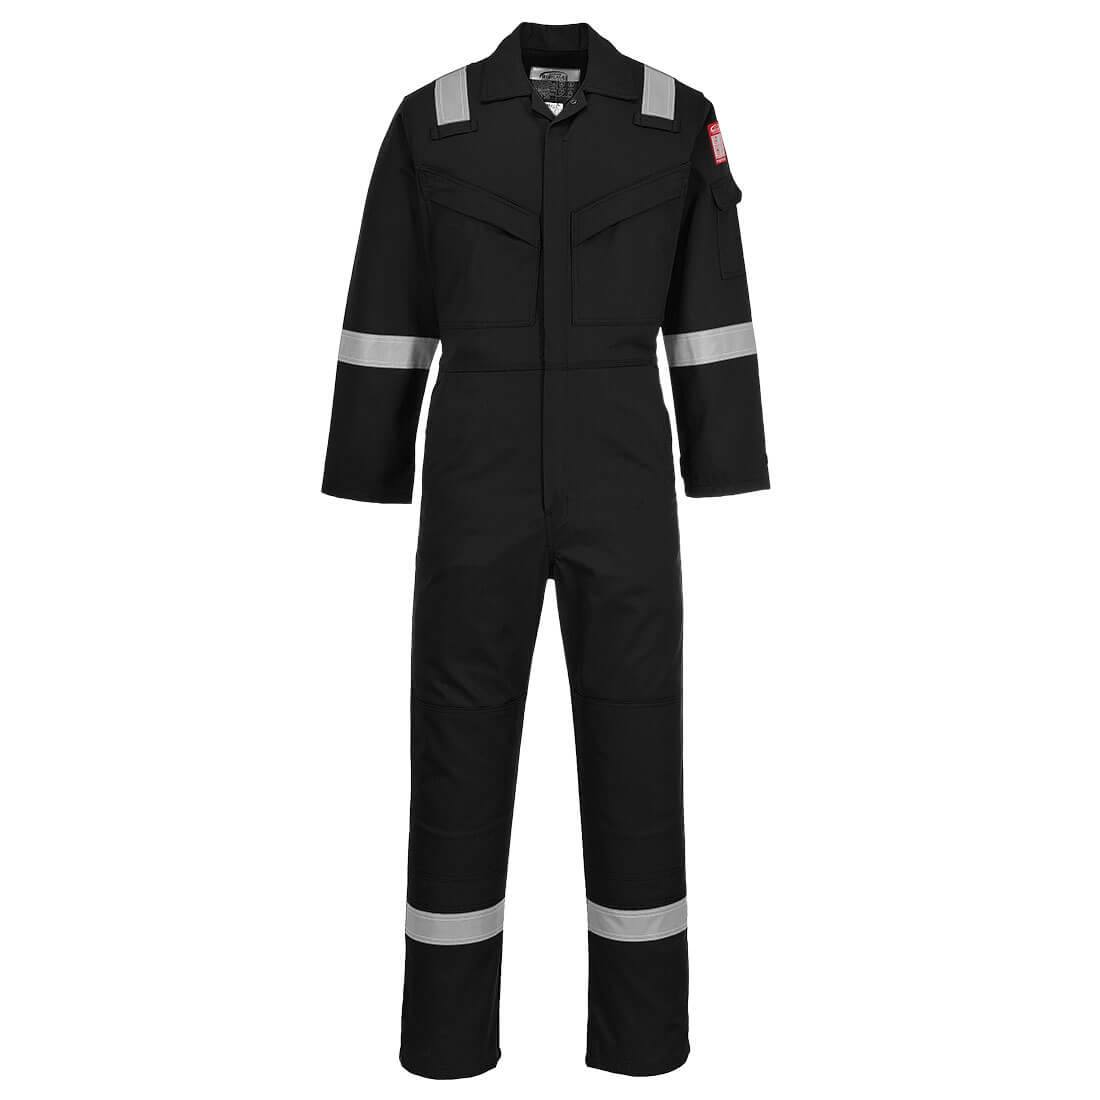 Image of Biz Flame Mens Aberdeen Flame Resistant Antistatic Coverall Black S 32"